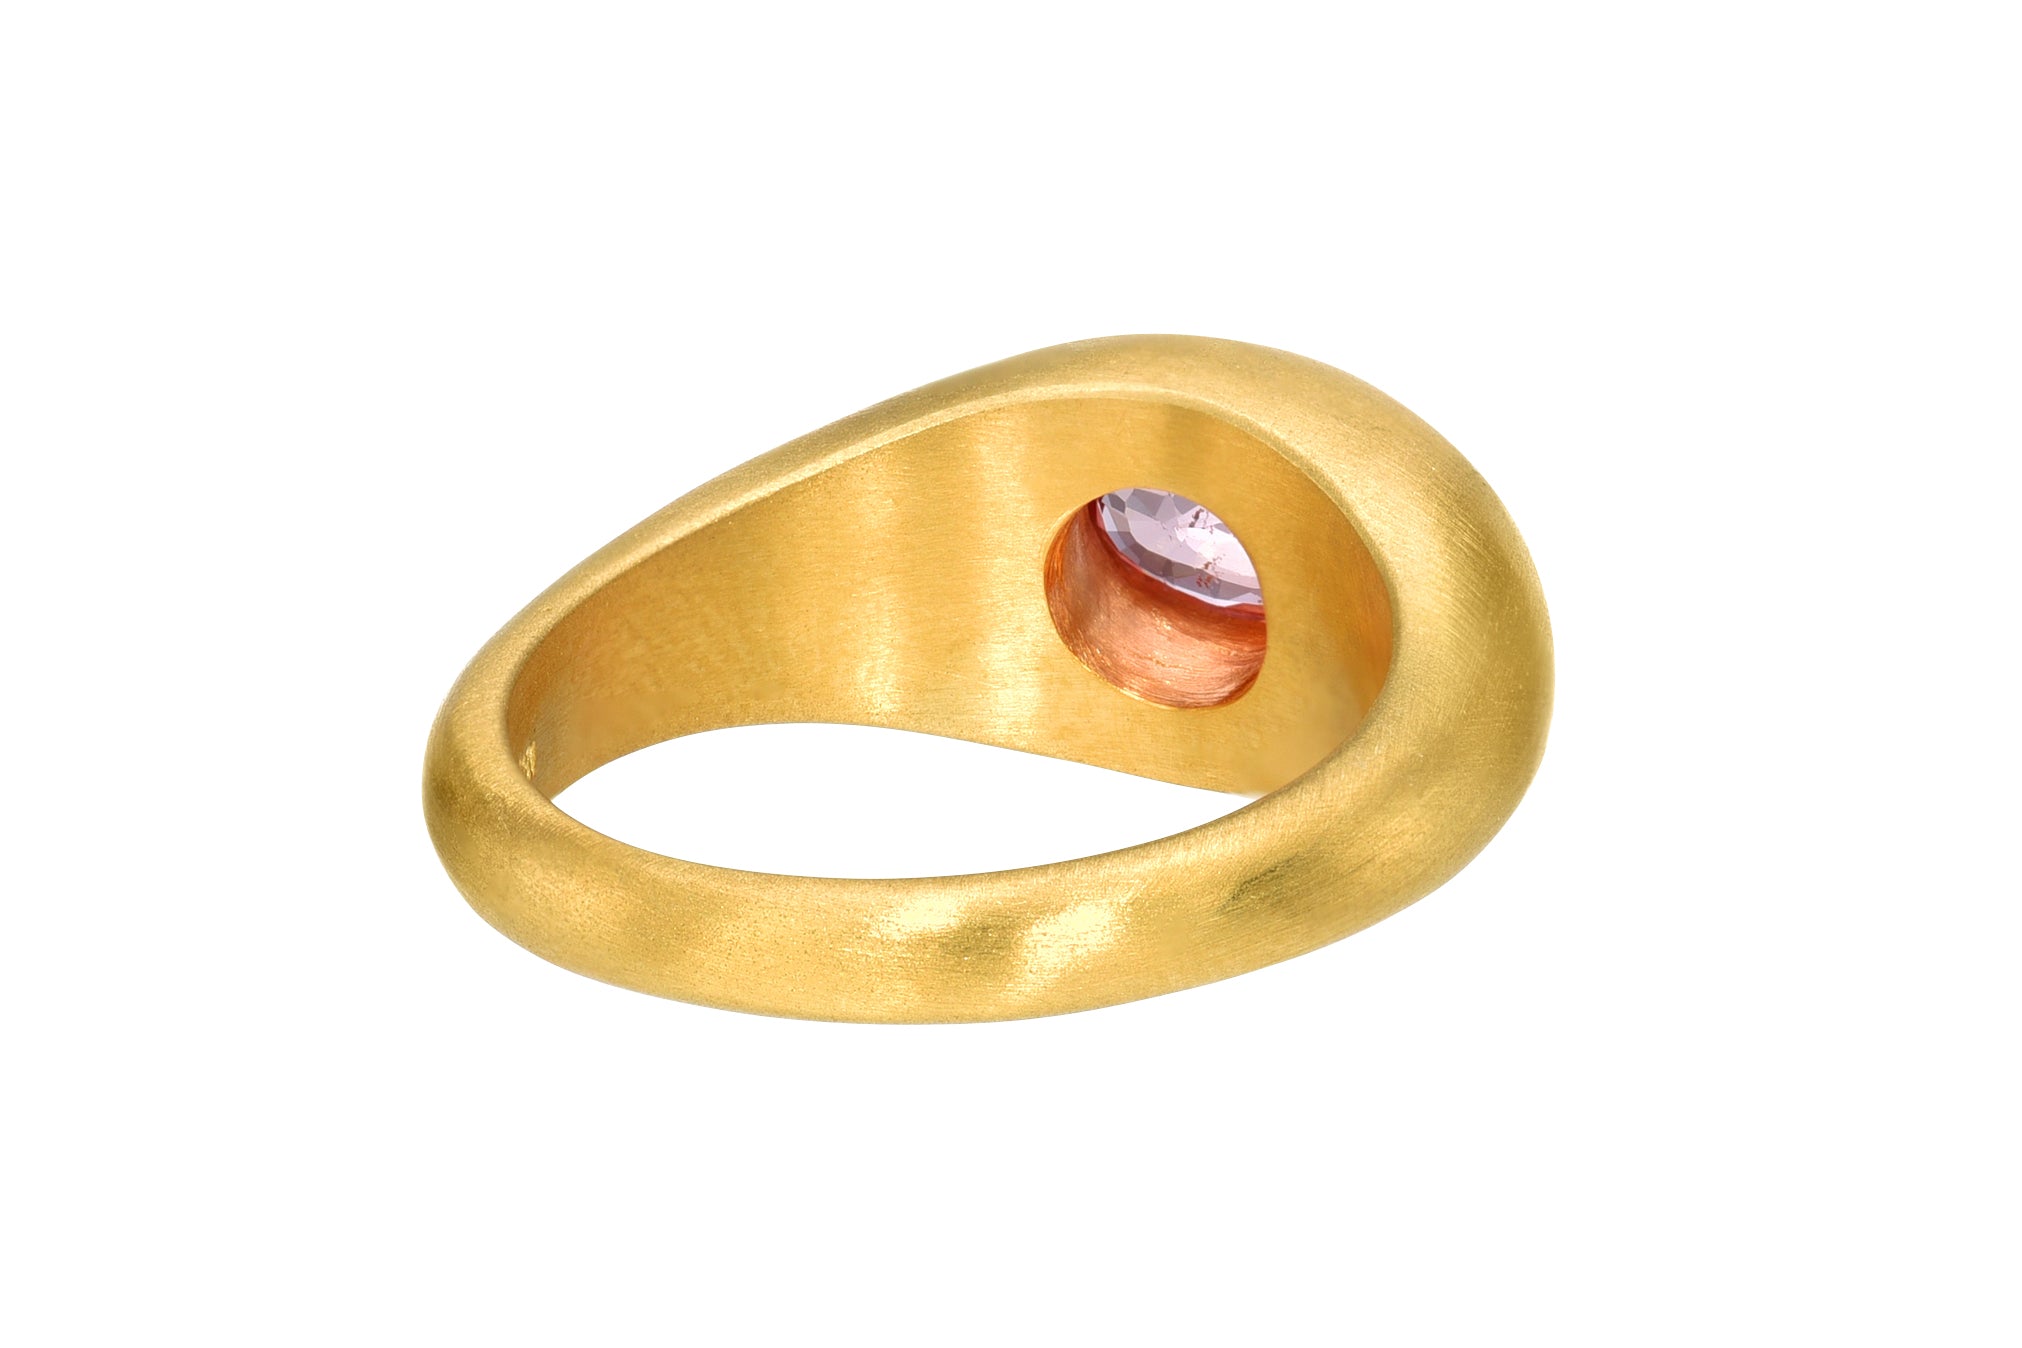 Darius Jewels one of a kind padparadscha sapphire gem signet ring